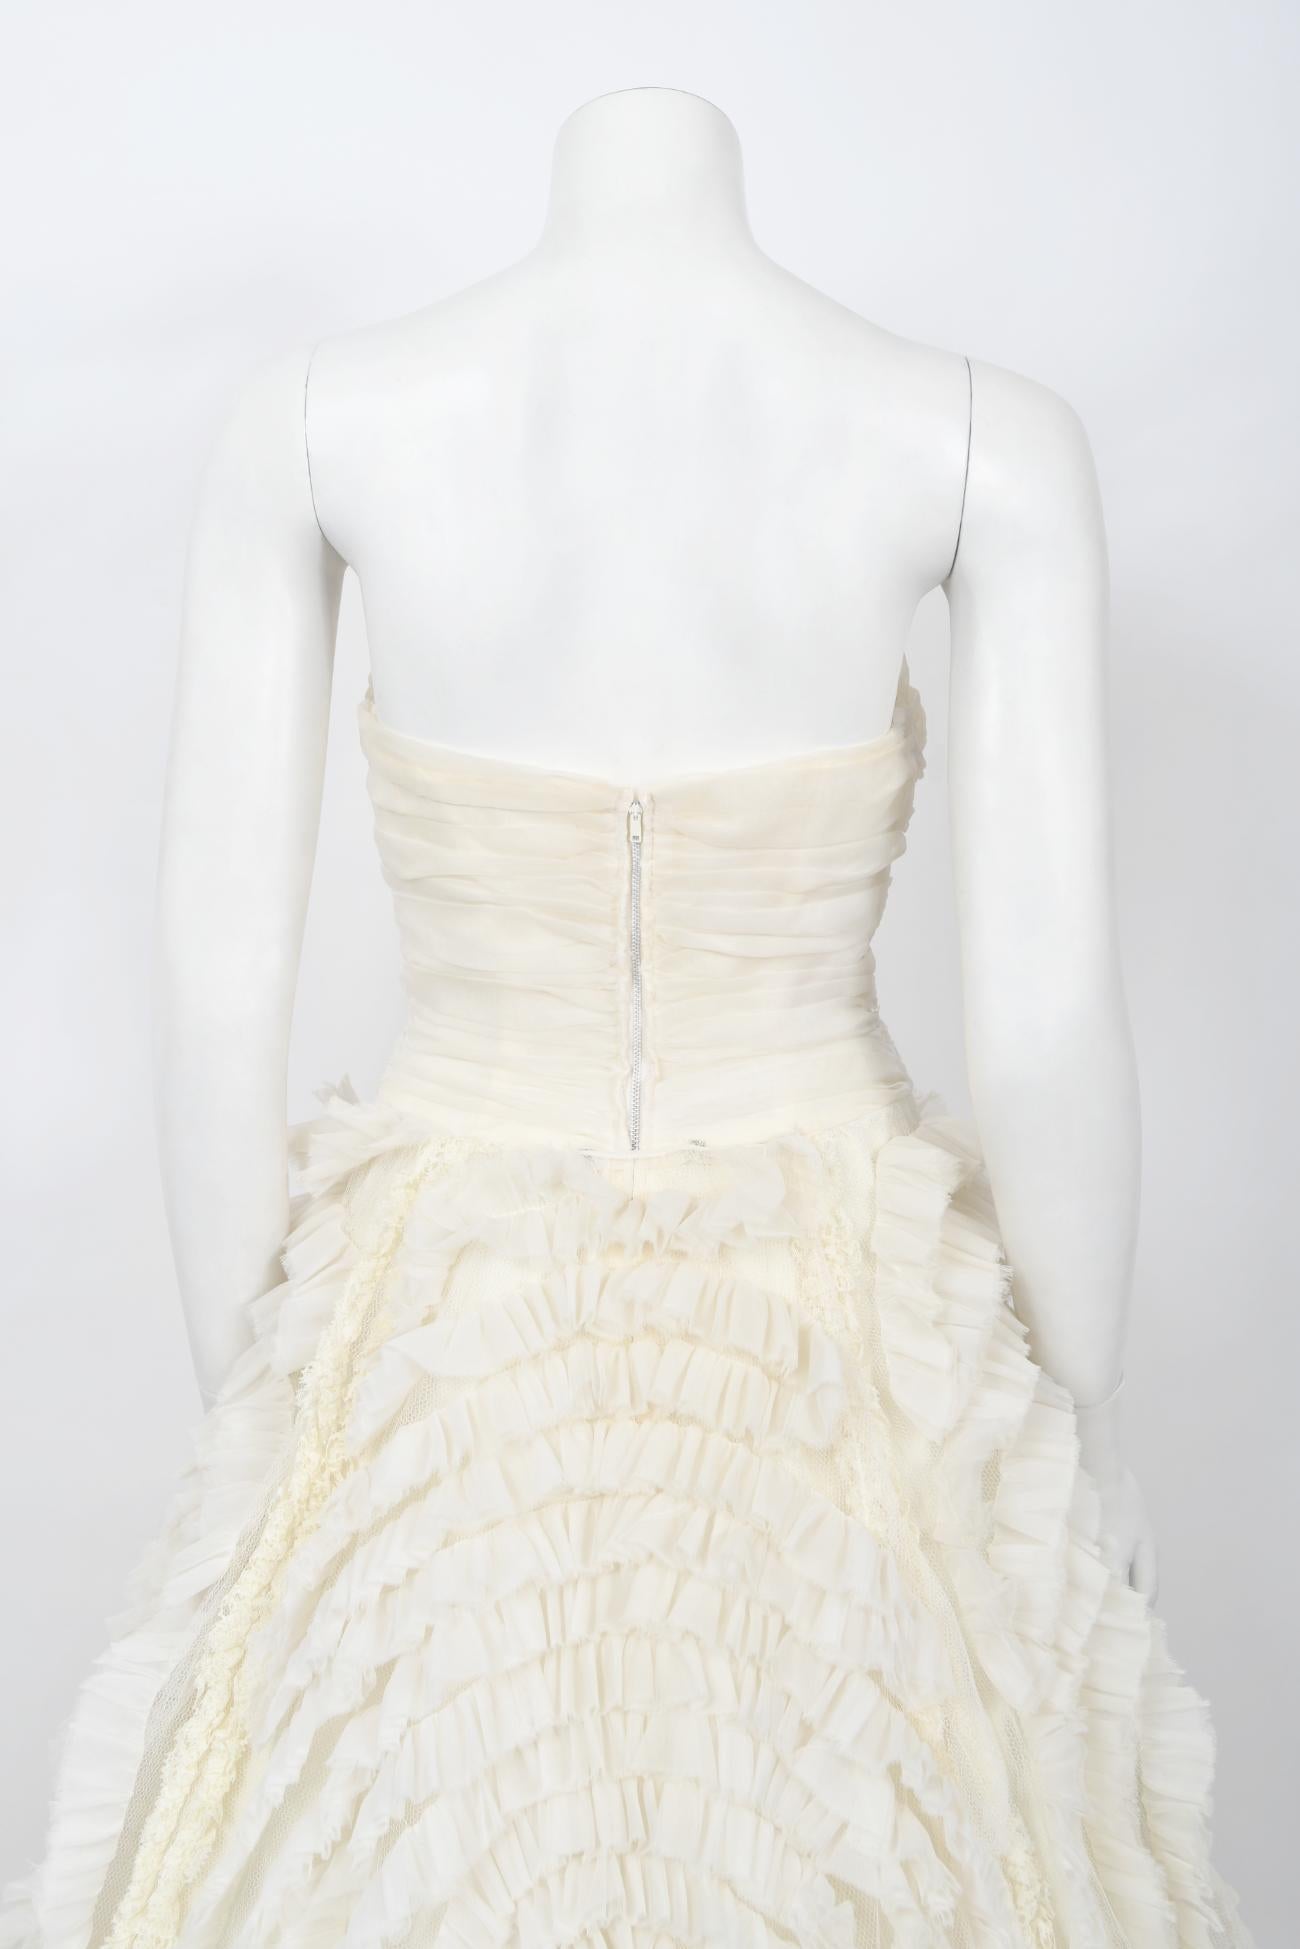 Vintage 1950's Ivory Chiffon Strapless Tiered Ruffle Full-Length Bridal Gown  10